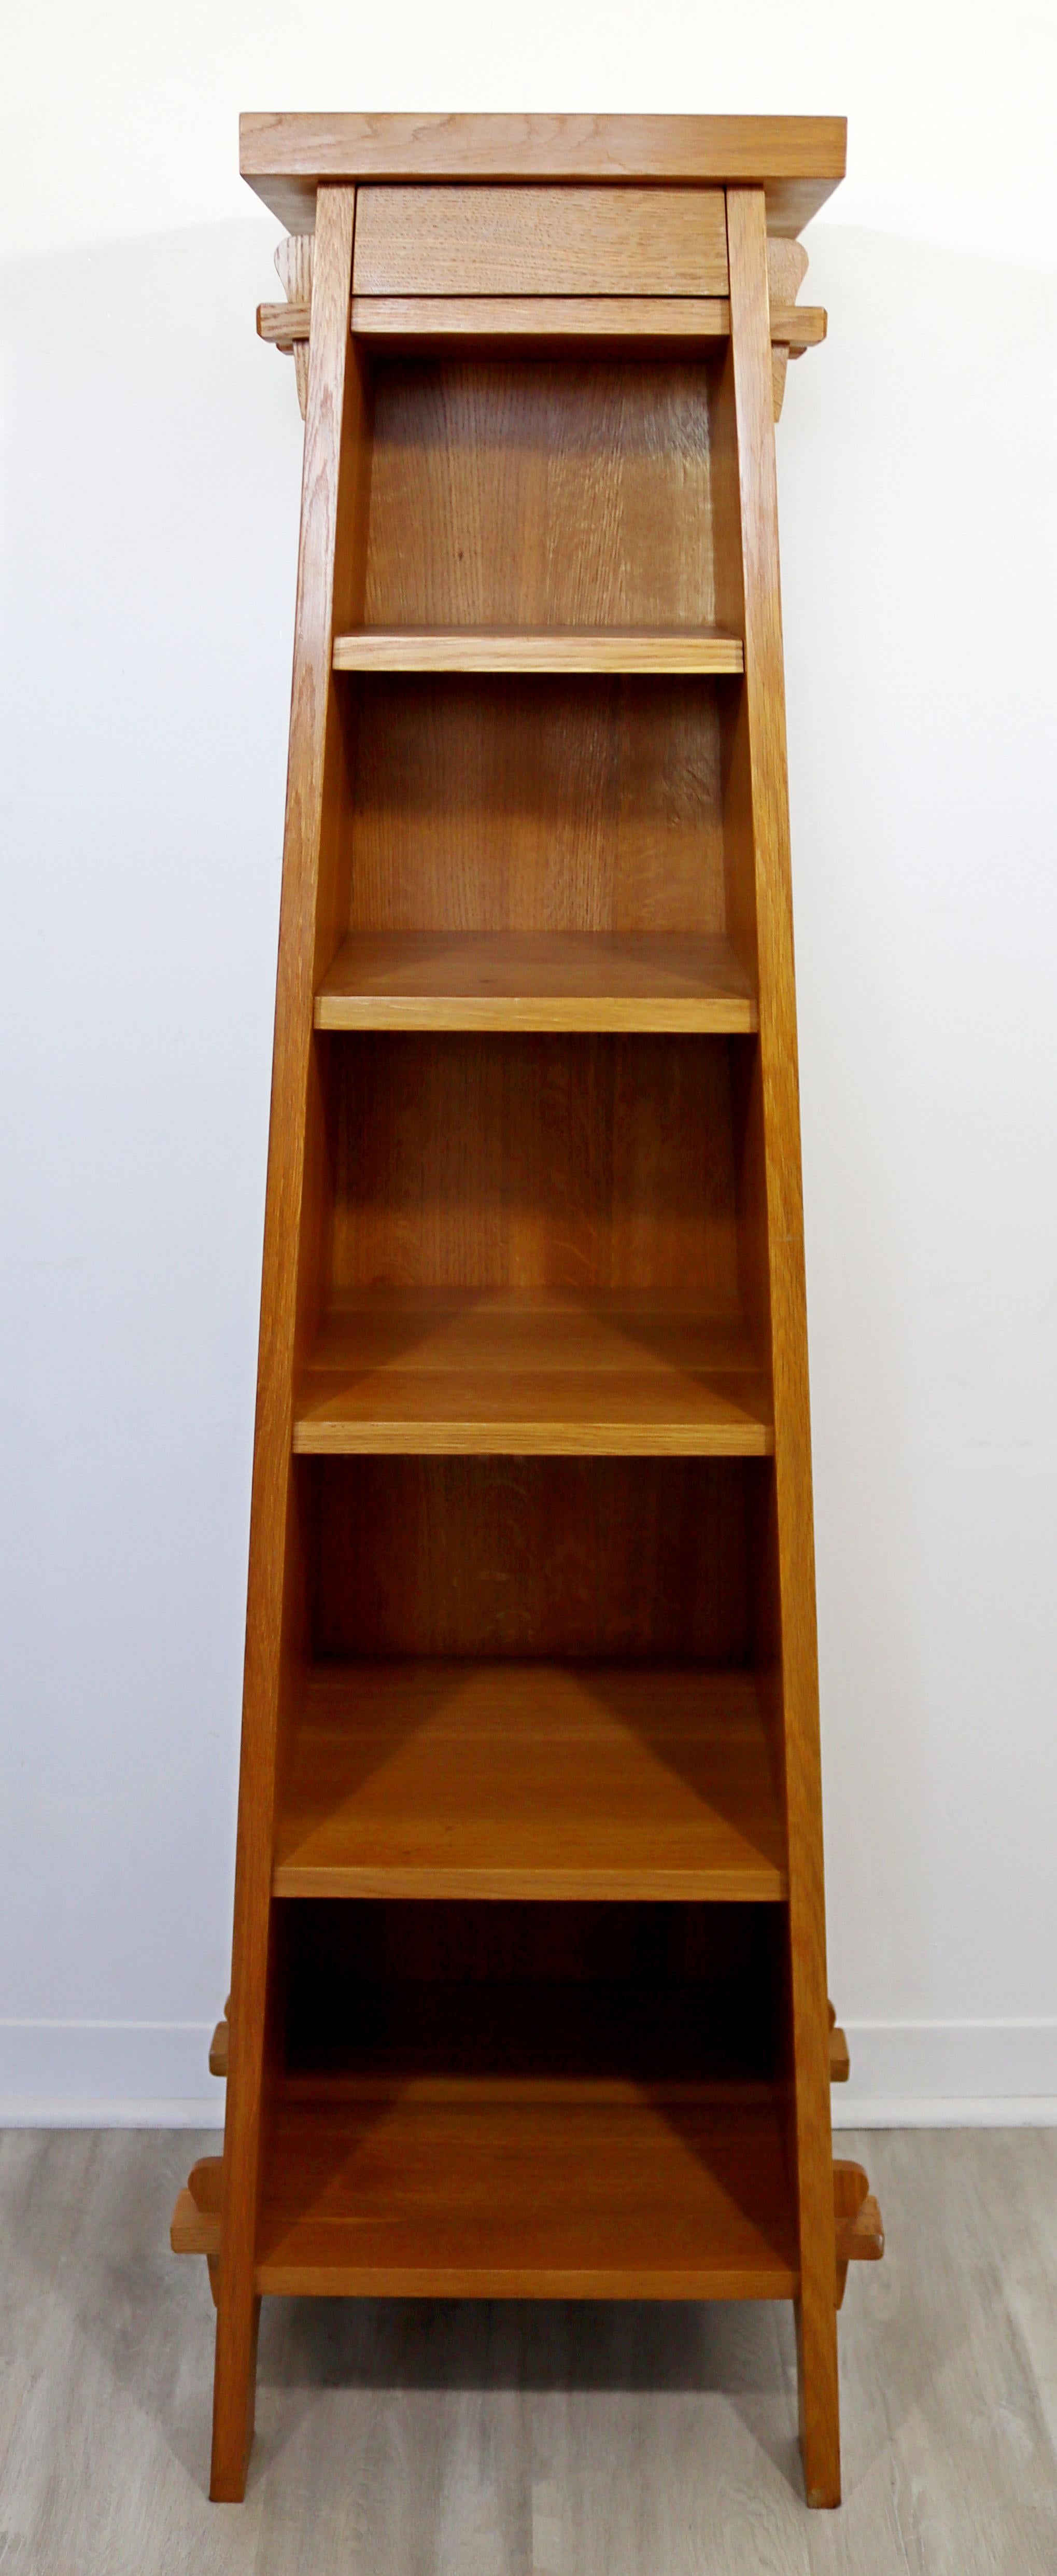 For your consideration is a beautiful, Asian style shelving unit, with an engraved R for Roycroft, circa the 1970s. In very good vintage condition. The dimensions are 17.5